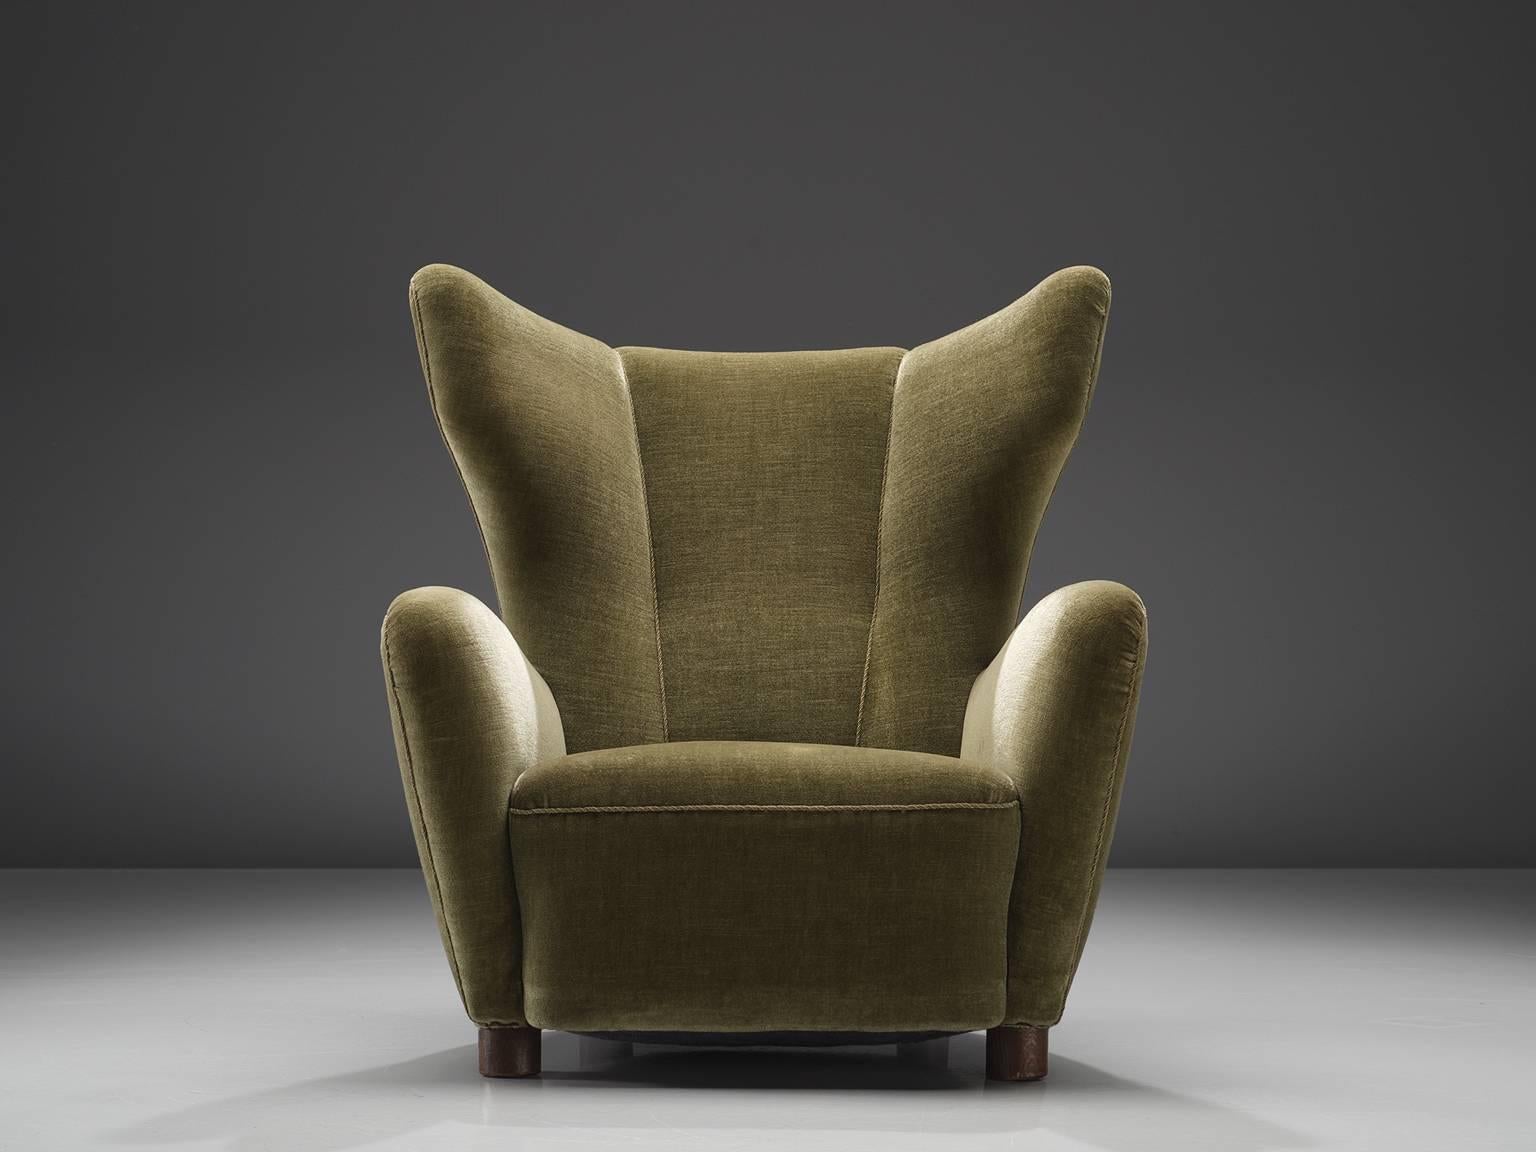 Danish cabinetmaker, wingback chair, mahogany, green velvet fabric, Denmark, circa 1940

This easy chair has a grand wing and a sectioned back. The seat is thick and the armrests are thick, full and rounded. The sides are smooth and soft and the